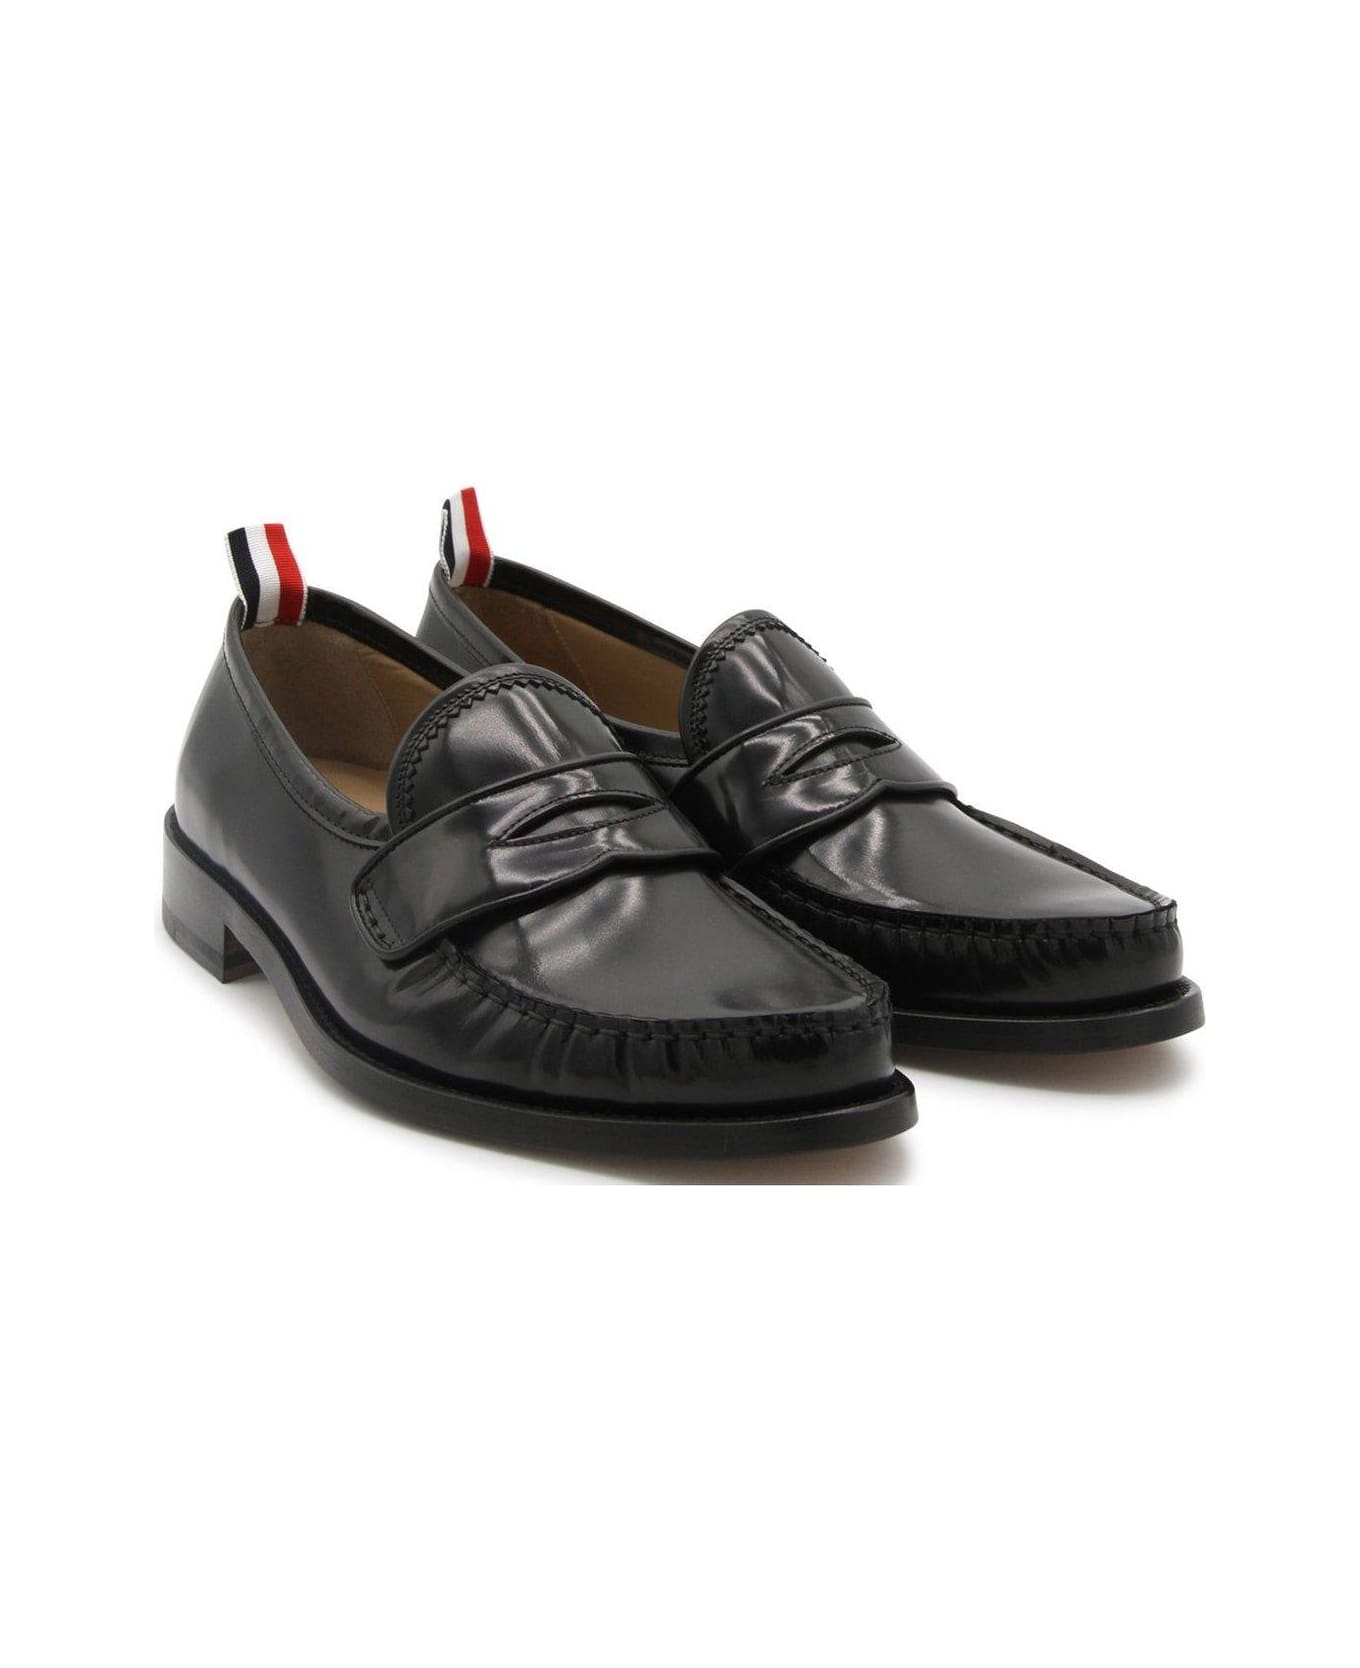 Thom Browne Almond Toe Penny-slot Loafers - Black